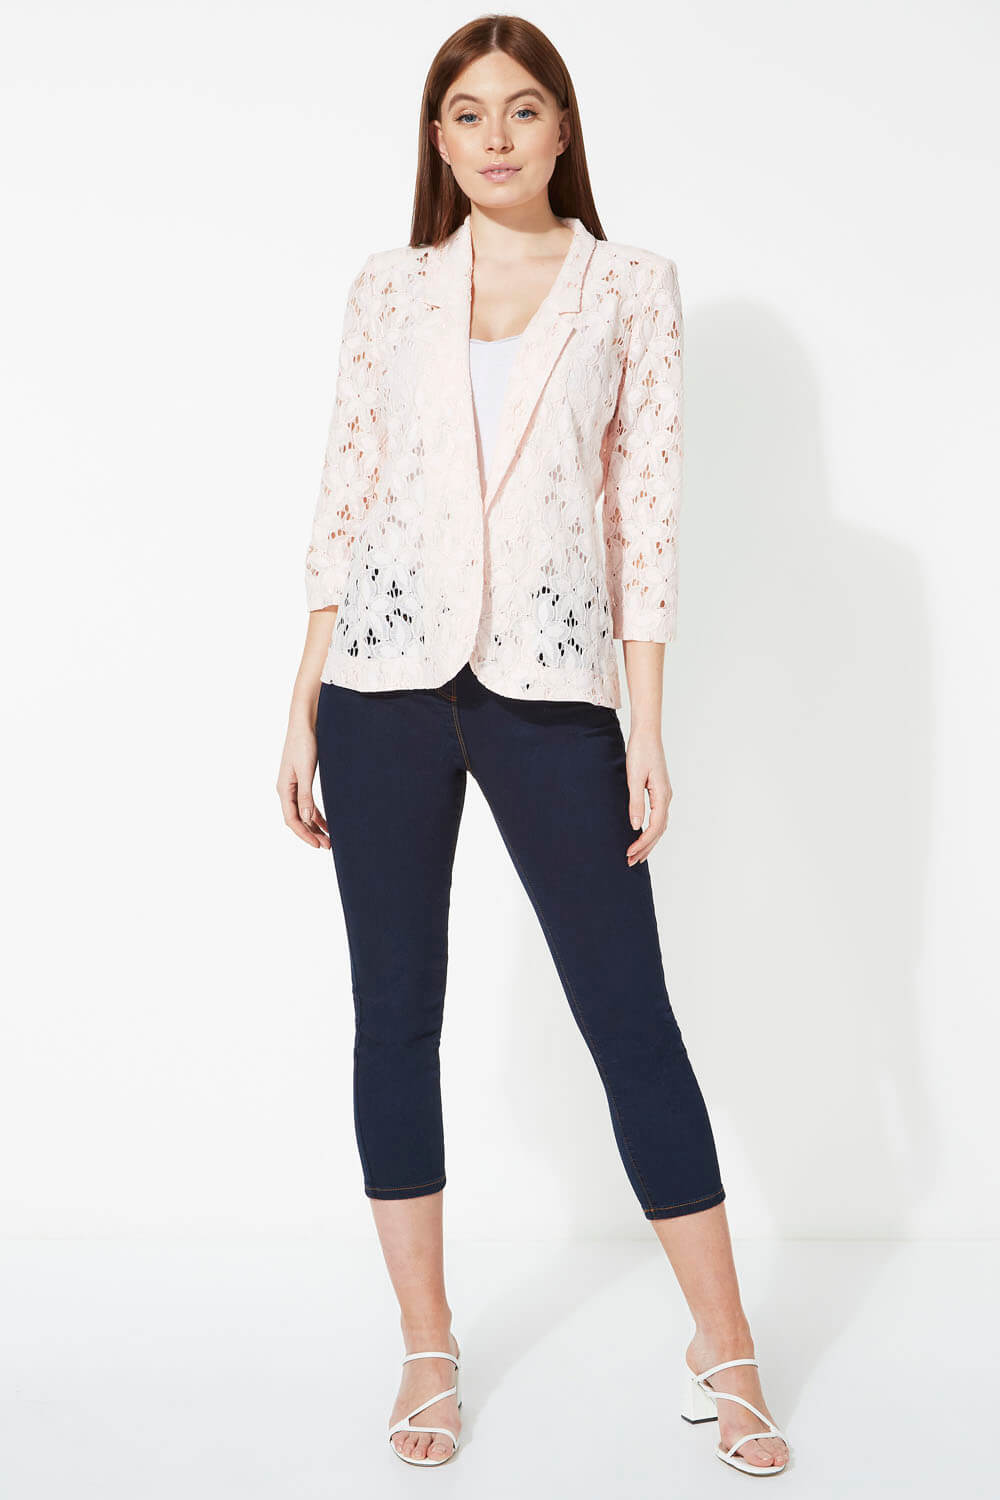 PINK Floral Lace 3/4 Sleeve Jacket, Image 2 of 4